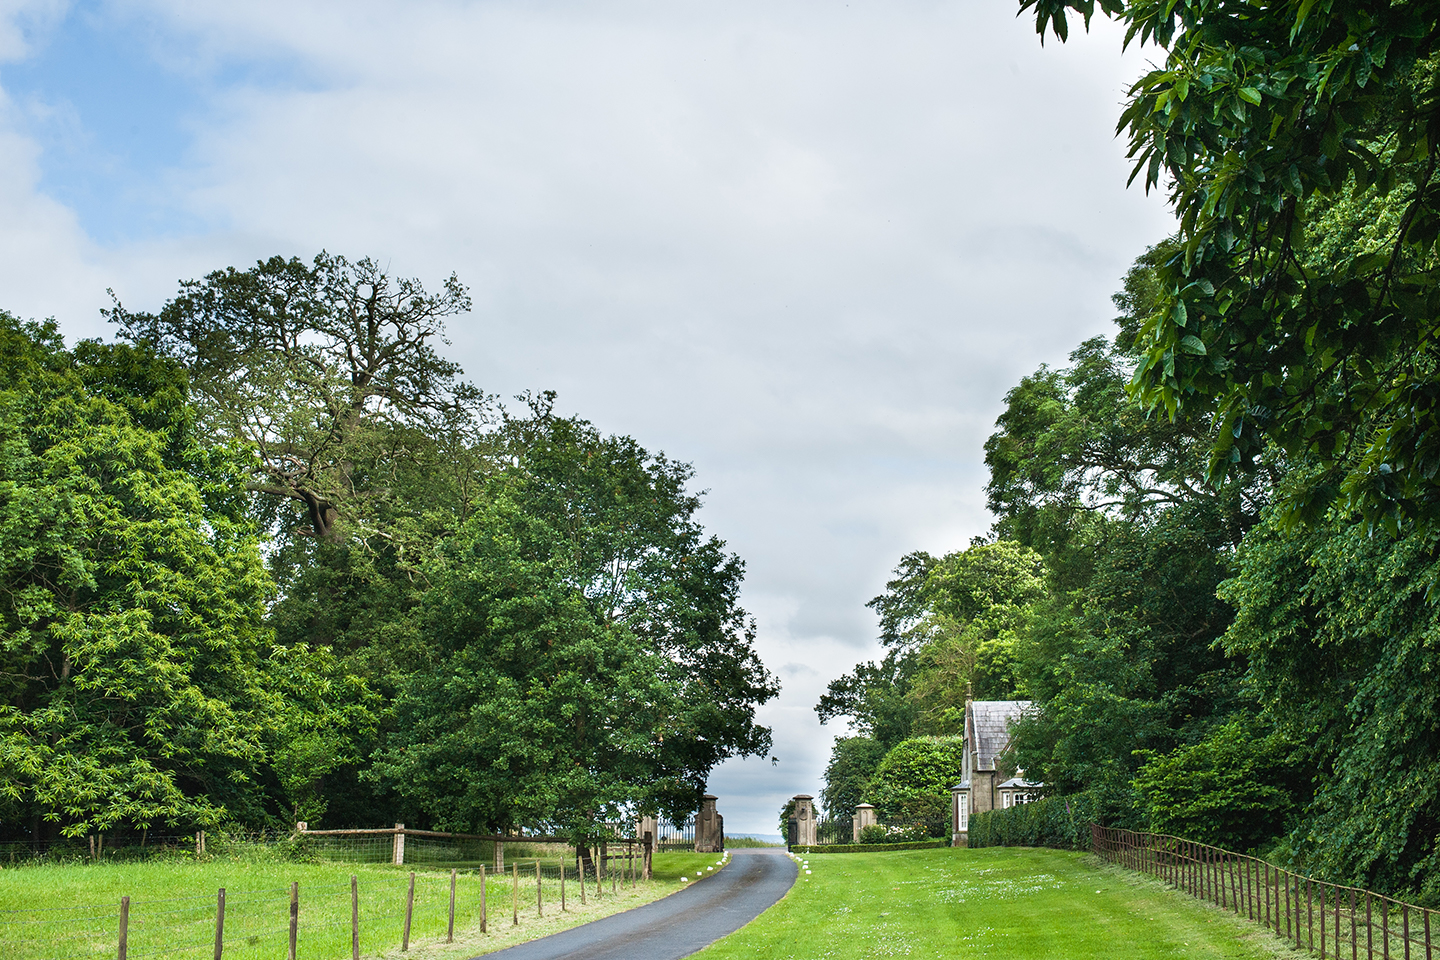 The drive up to the North Wing accommodation is surrounded by stunning rural scenery at Combermere Abbey Estate in Cheshire